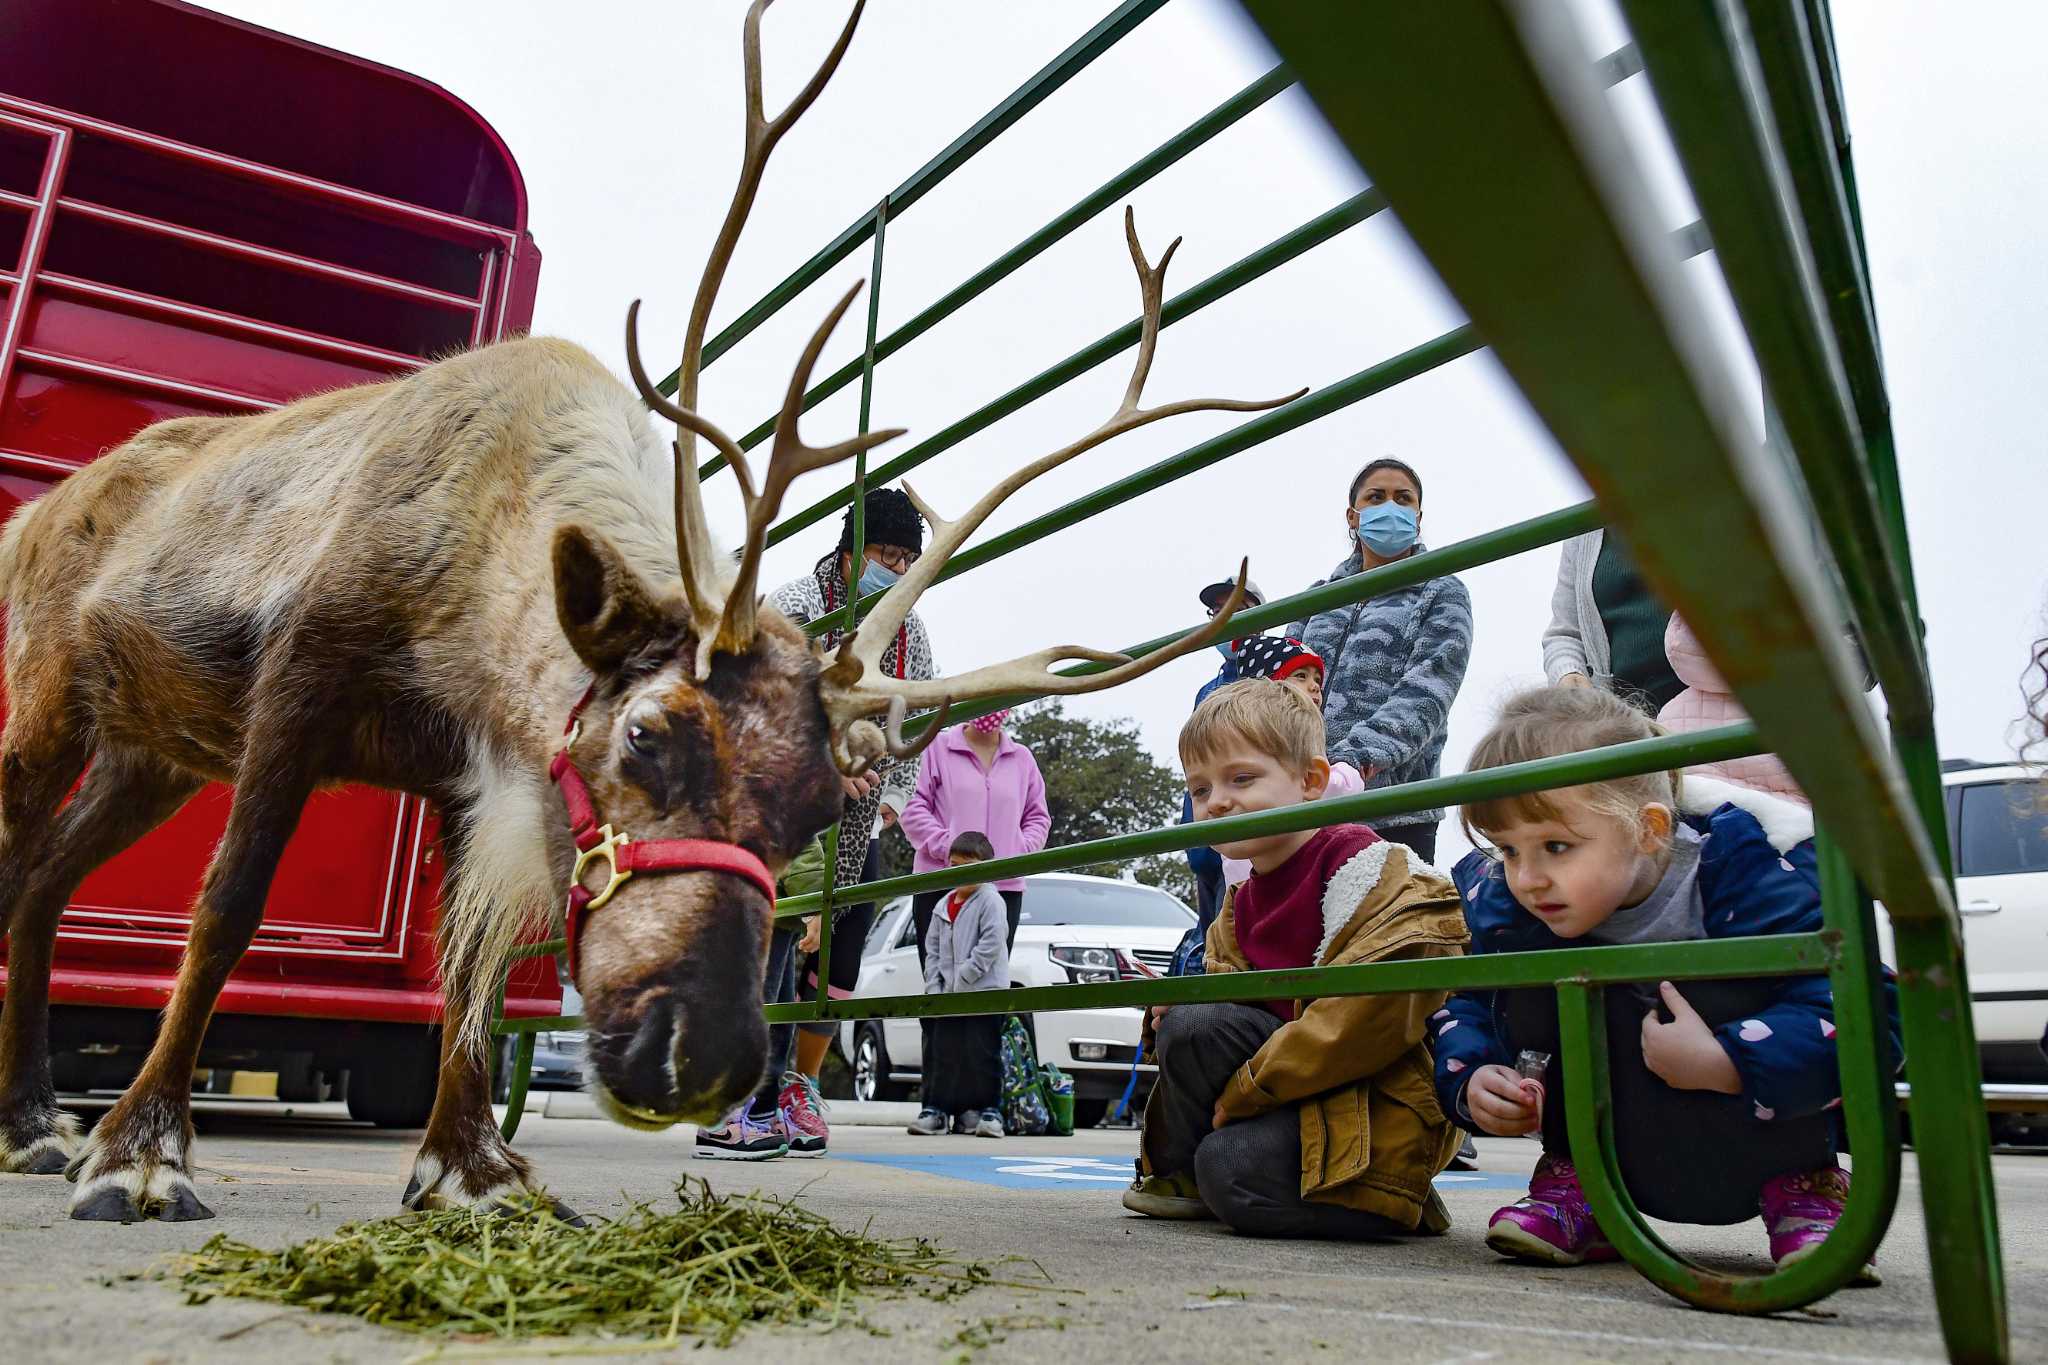 Santa’s reindeer have a ton of nonmagical family members, but they’re exclusive, too